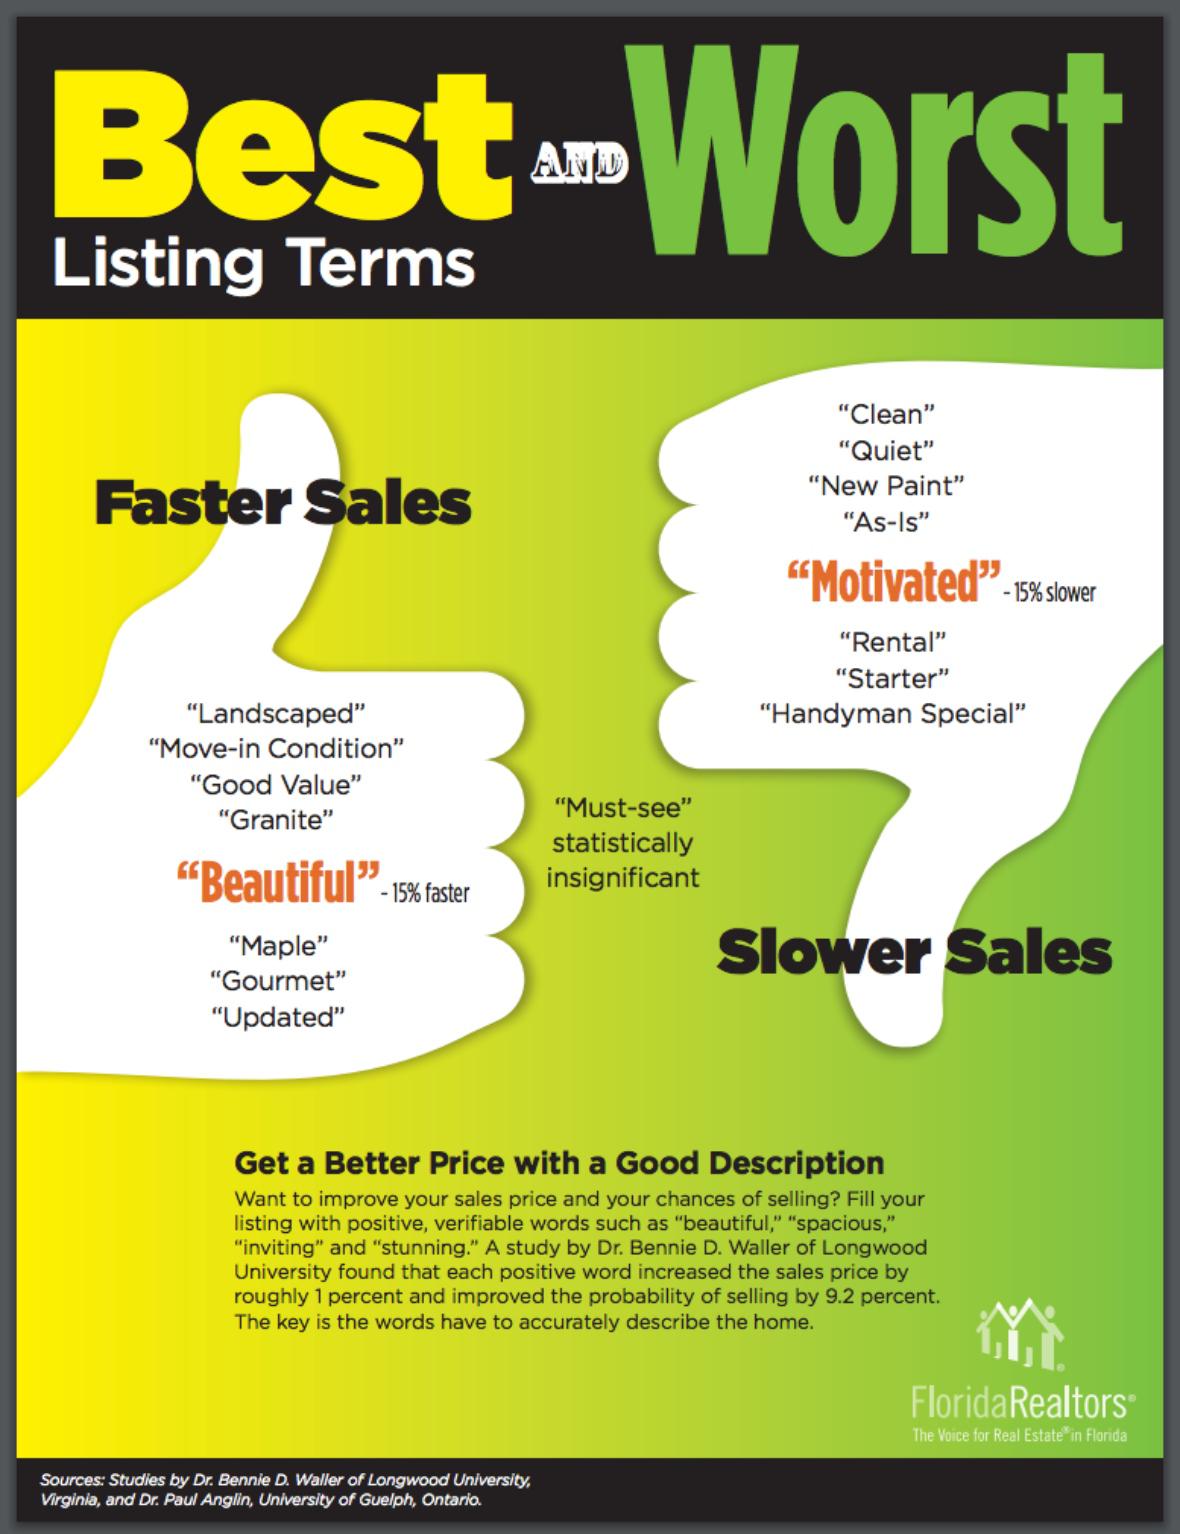 best worst listing terms